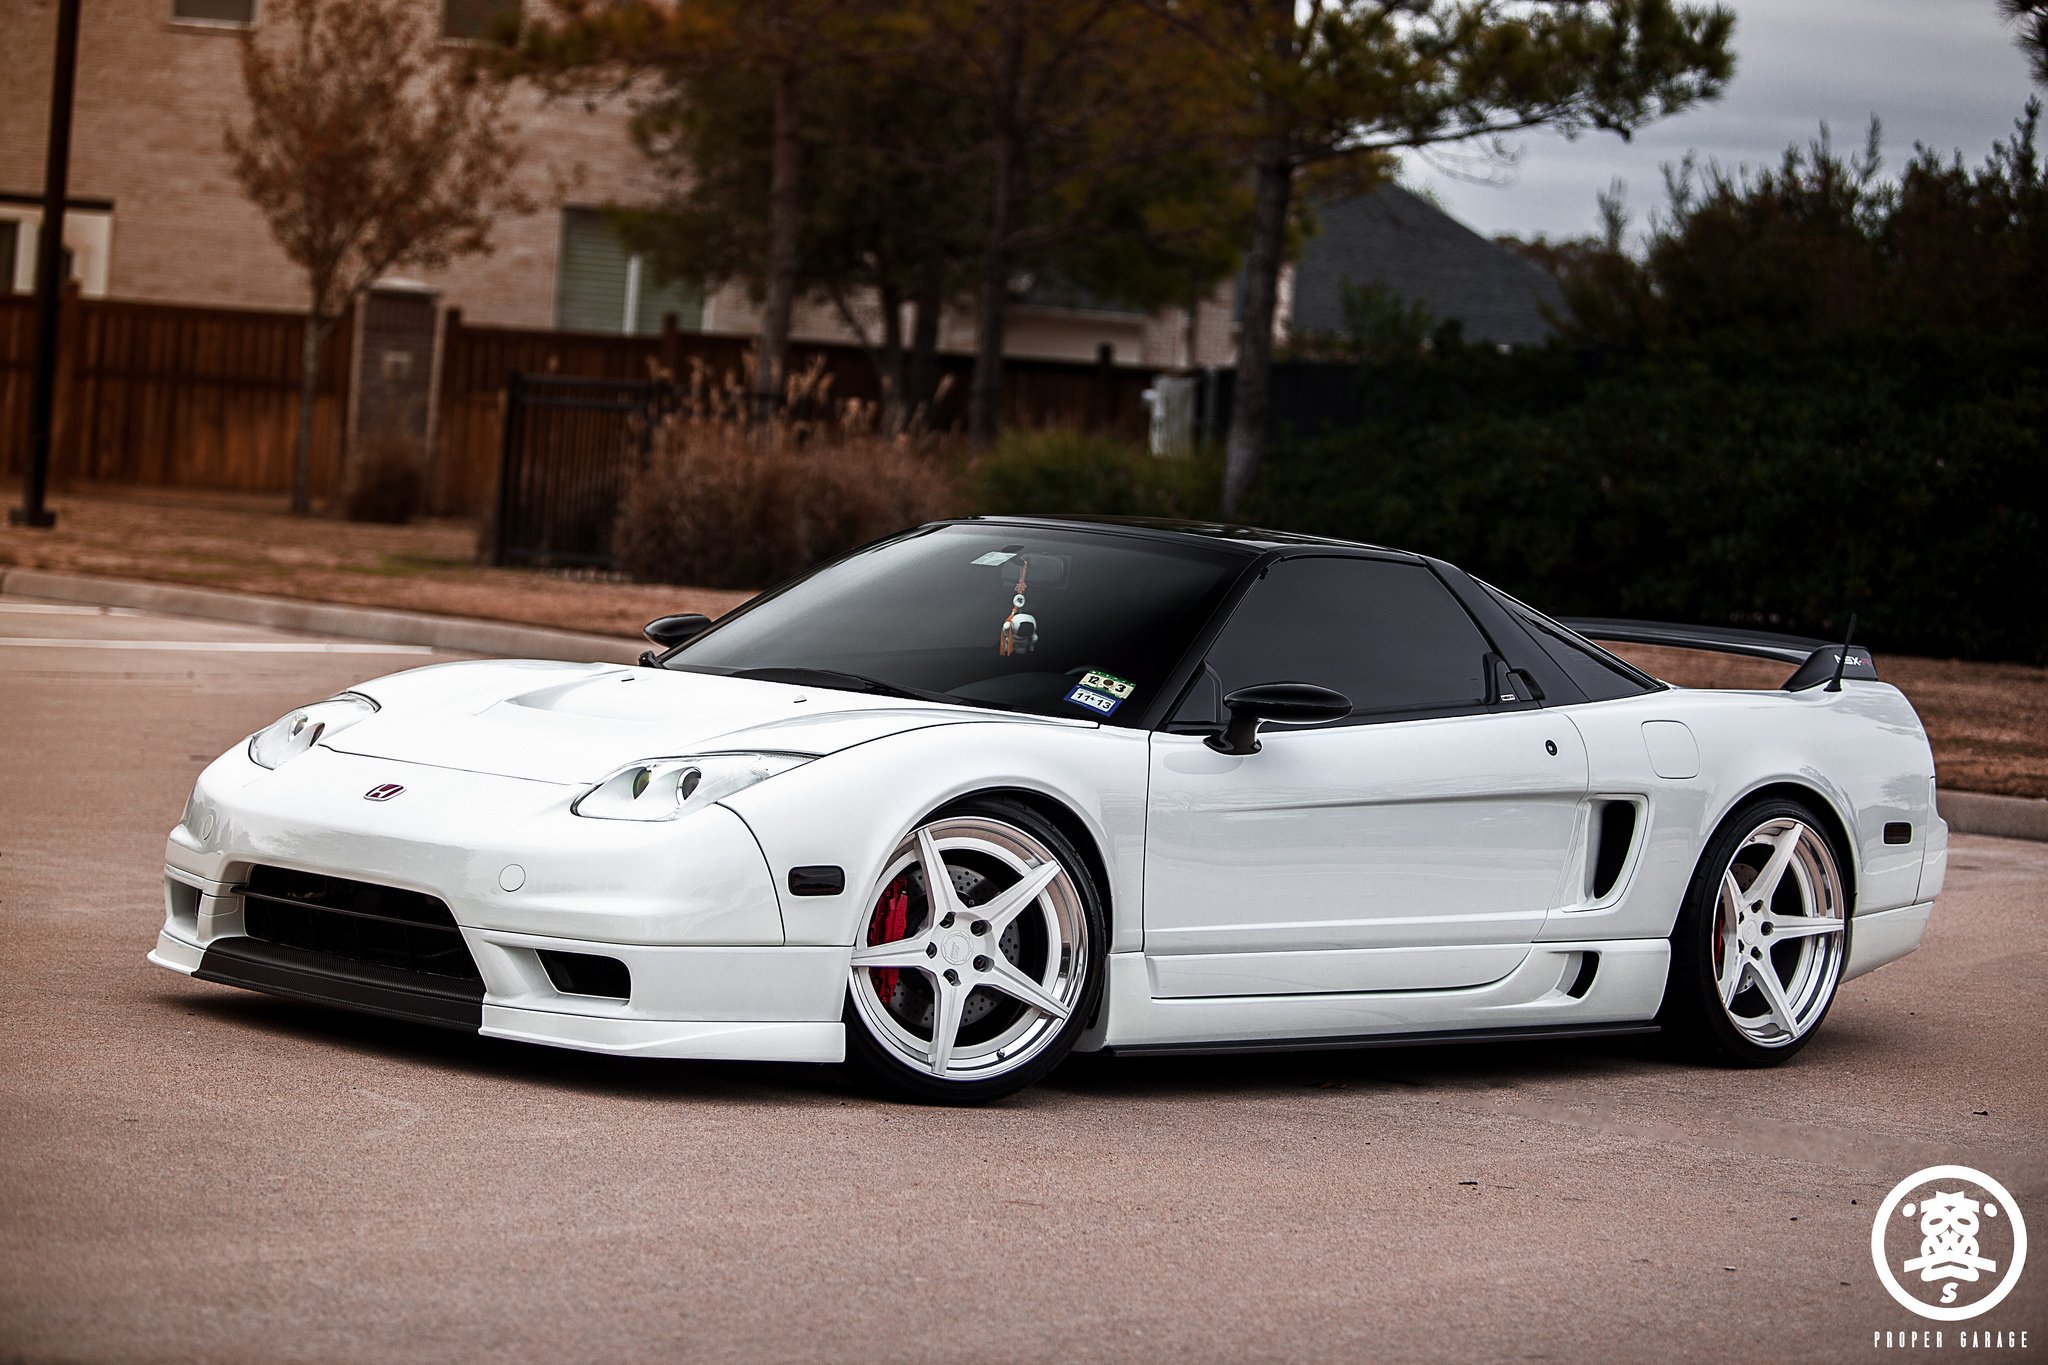 Honda Nsx Tuning Wallpapers Hd Desktop And Mobile Backgrounds